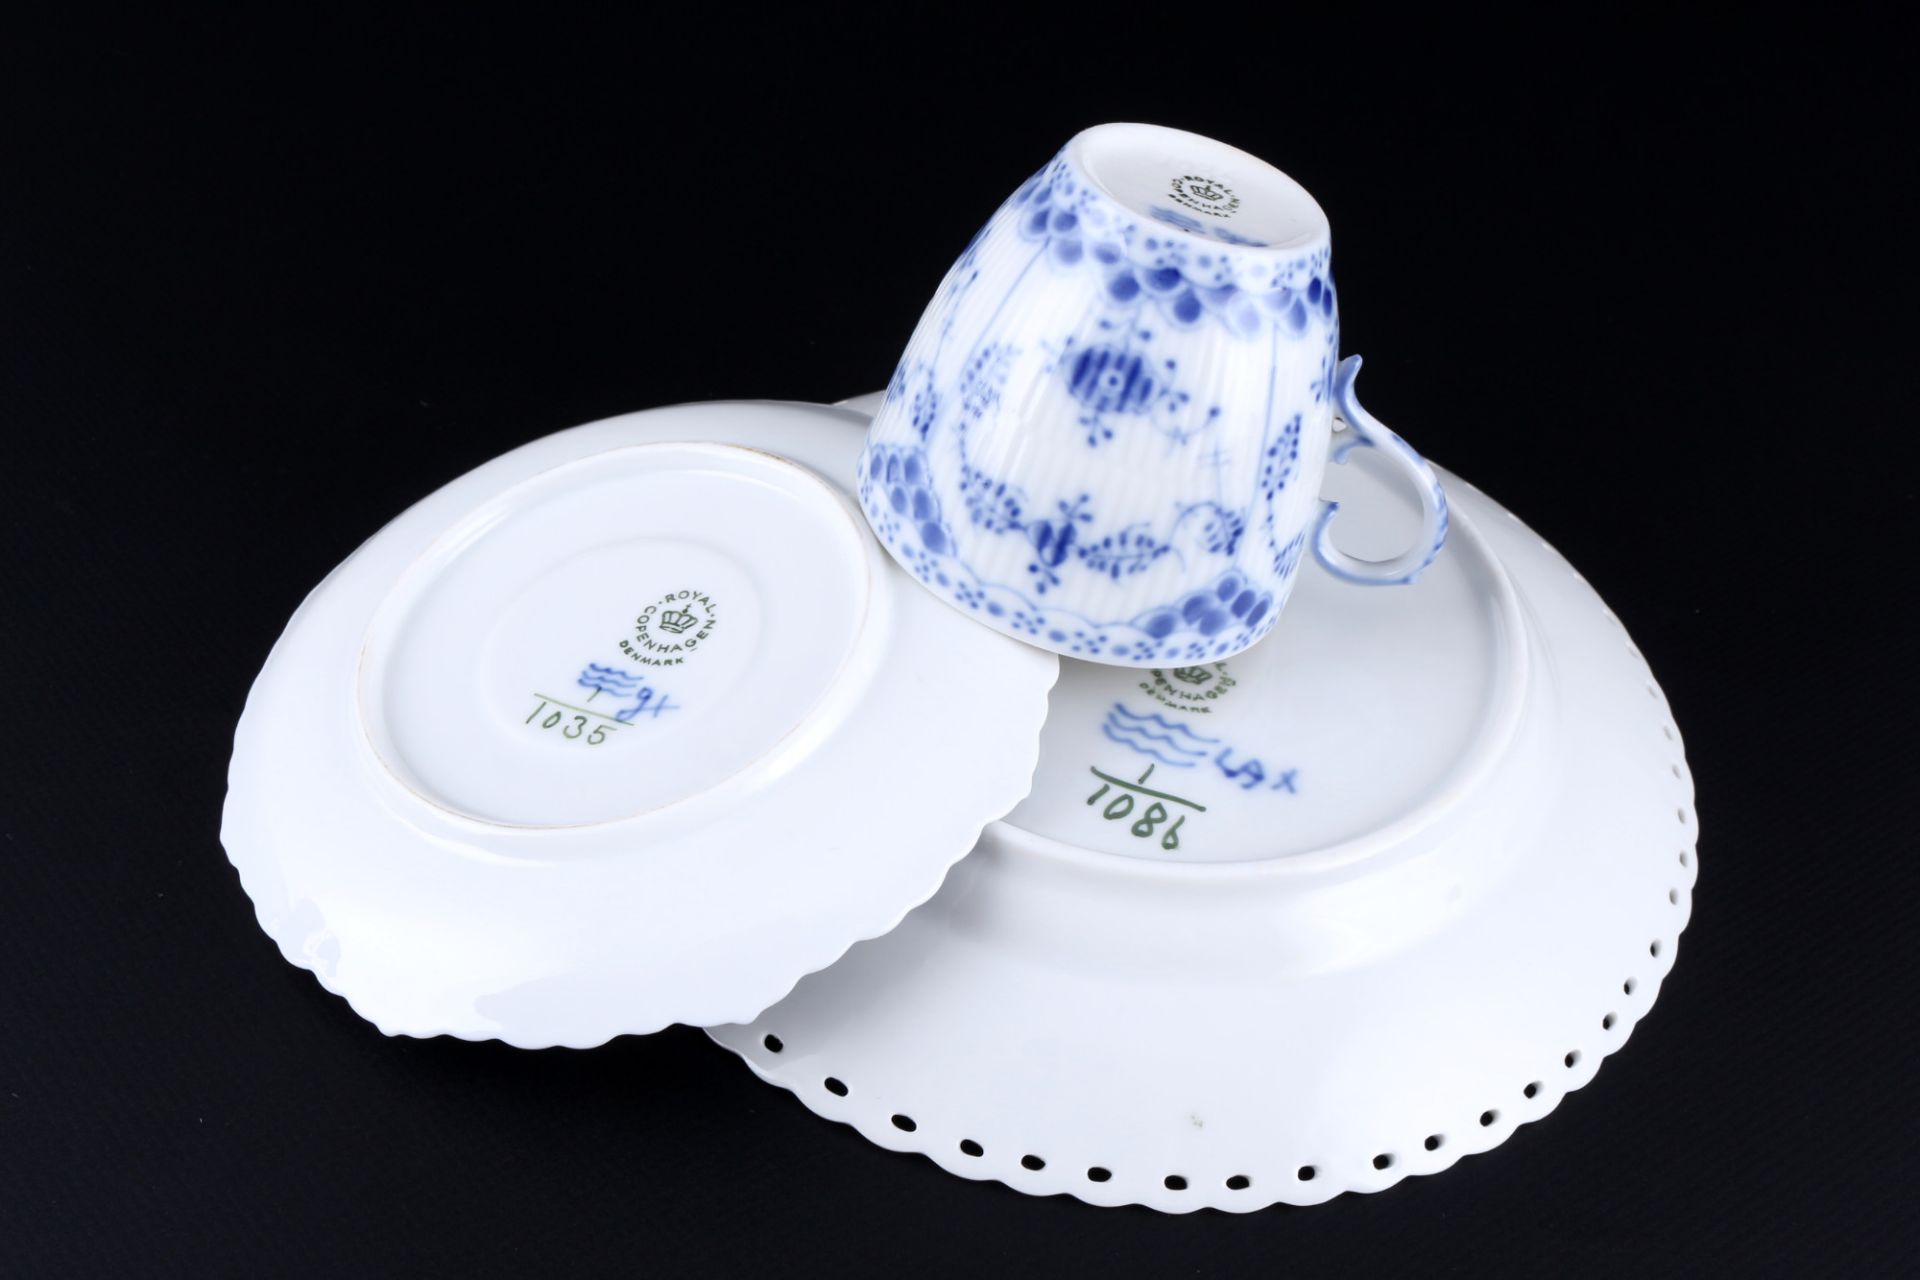 Royal Copenhagen Musselmalet Full Lace 6 coffee cups with dessert plates 1035/1086 1st choice, Voll - Image 3 of 3